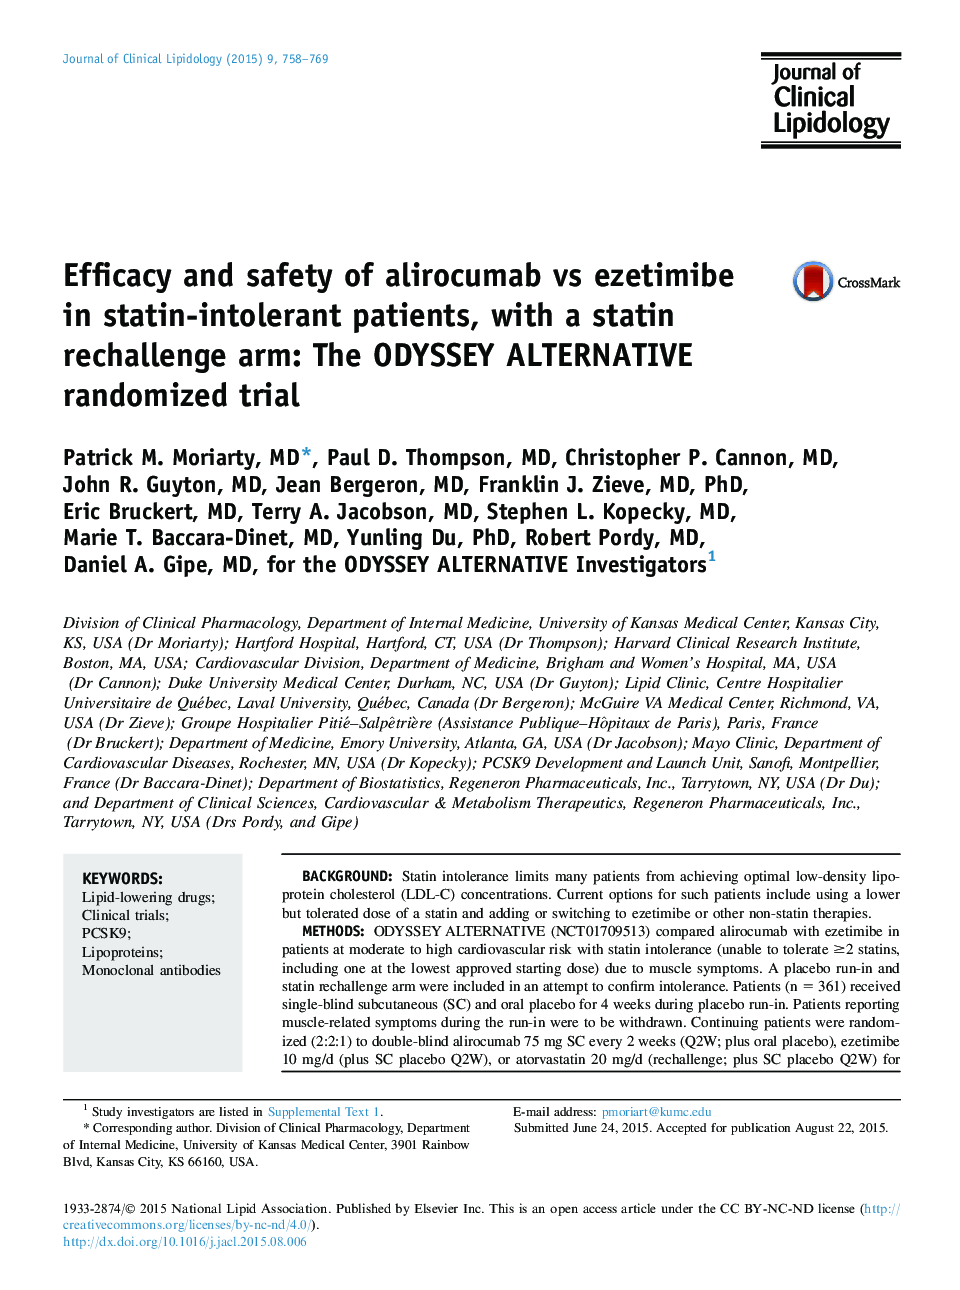 Efficacy and safety of alirocumab vs ezetimibe in statin-intolerant patients, with a statin rechallenge arm: The ODYSSEY ALTERNATIVE randomized trial